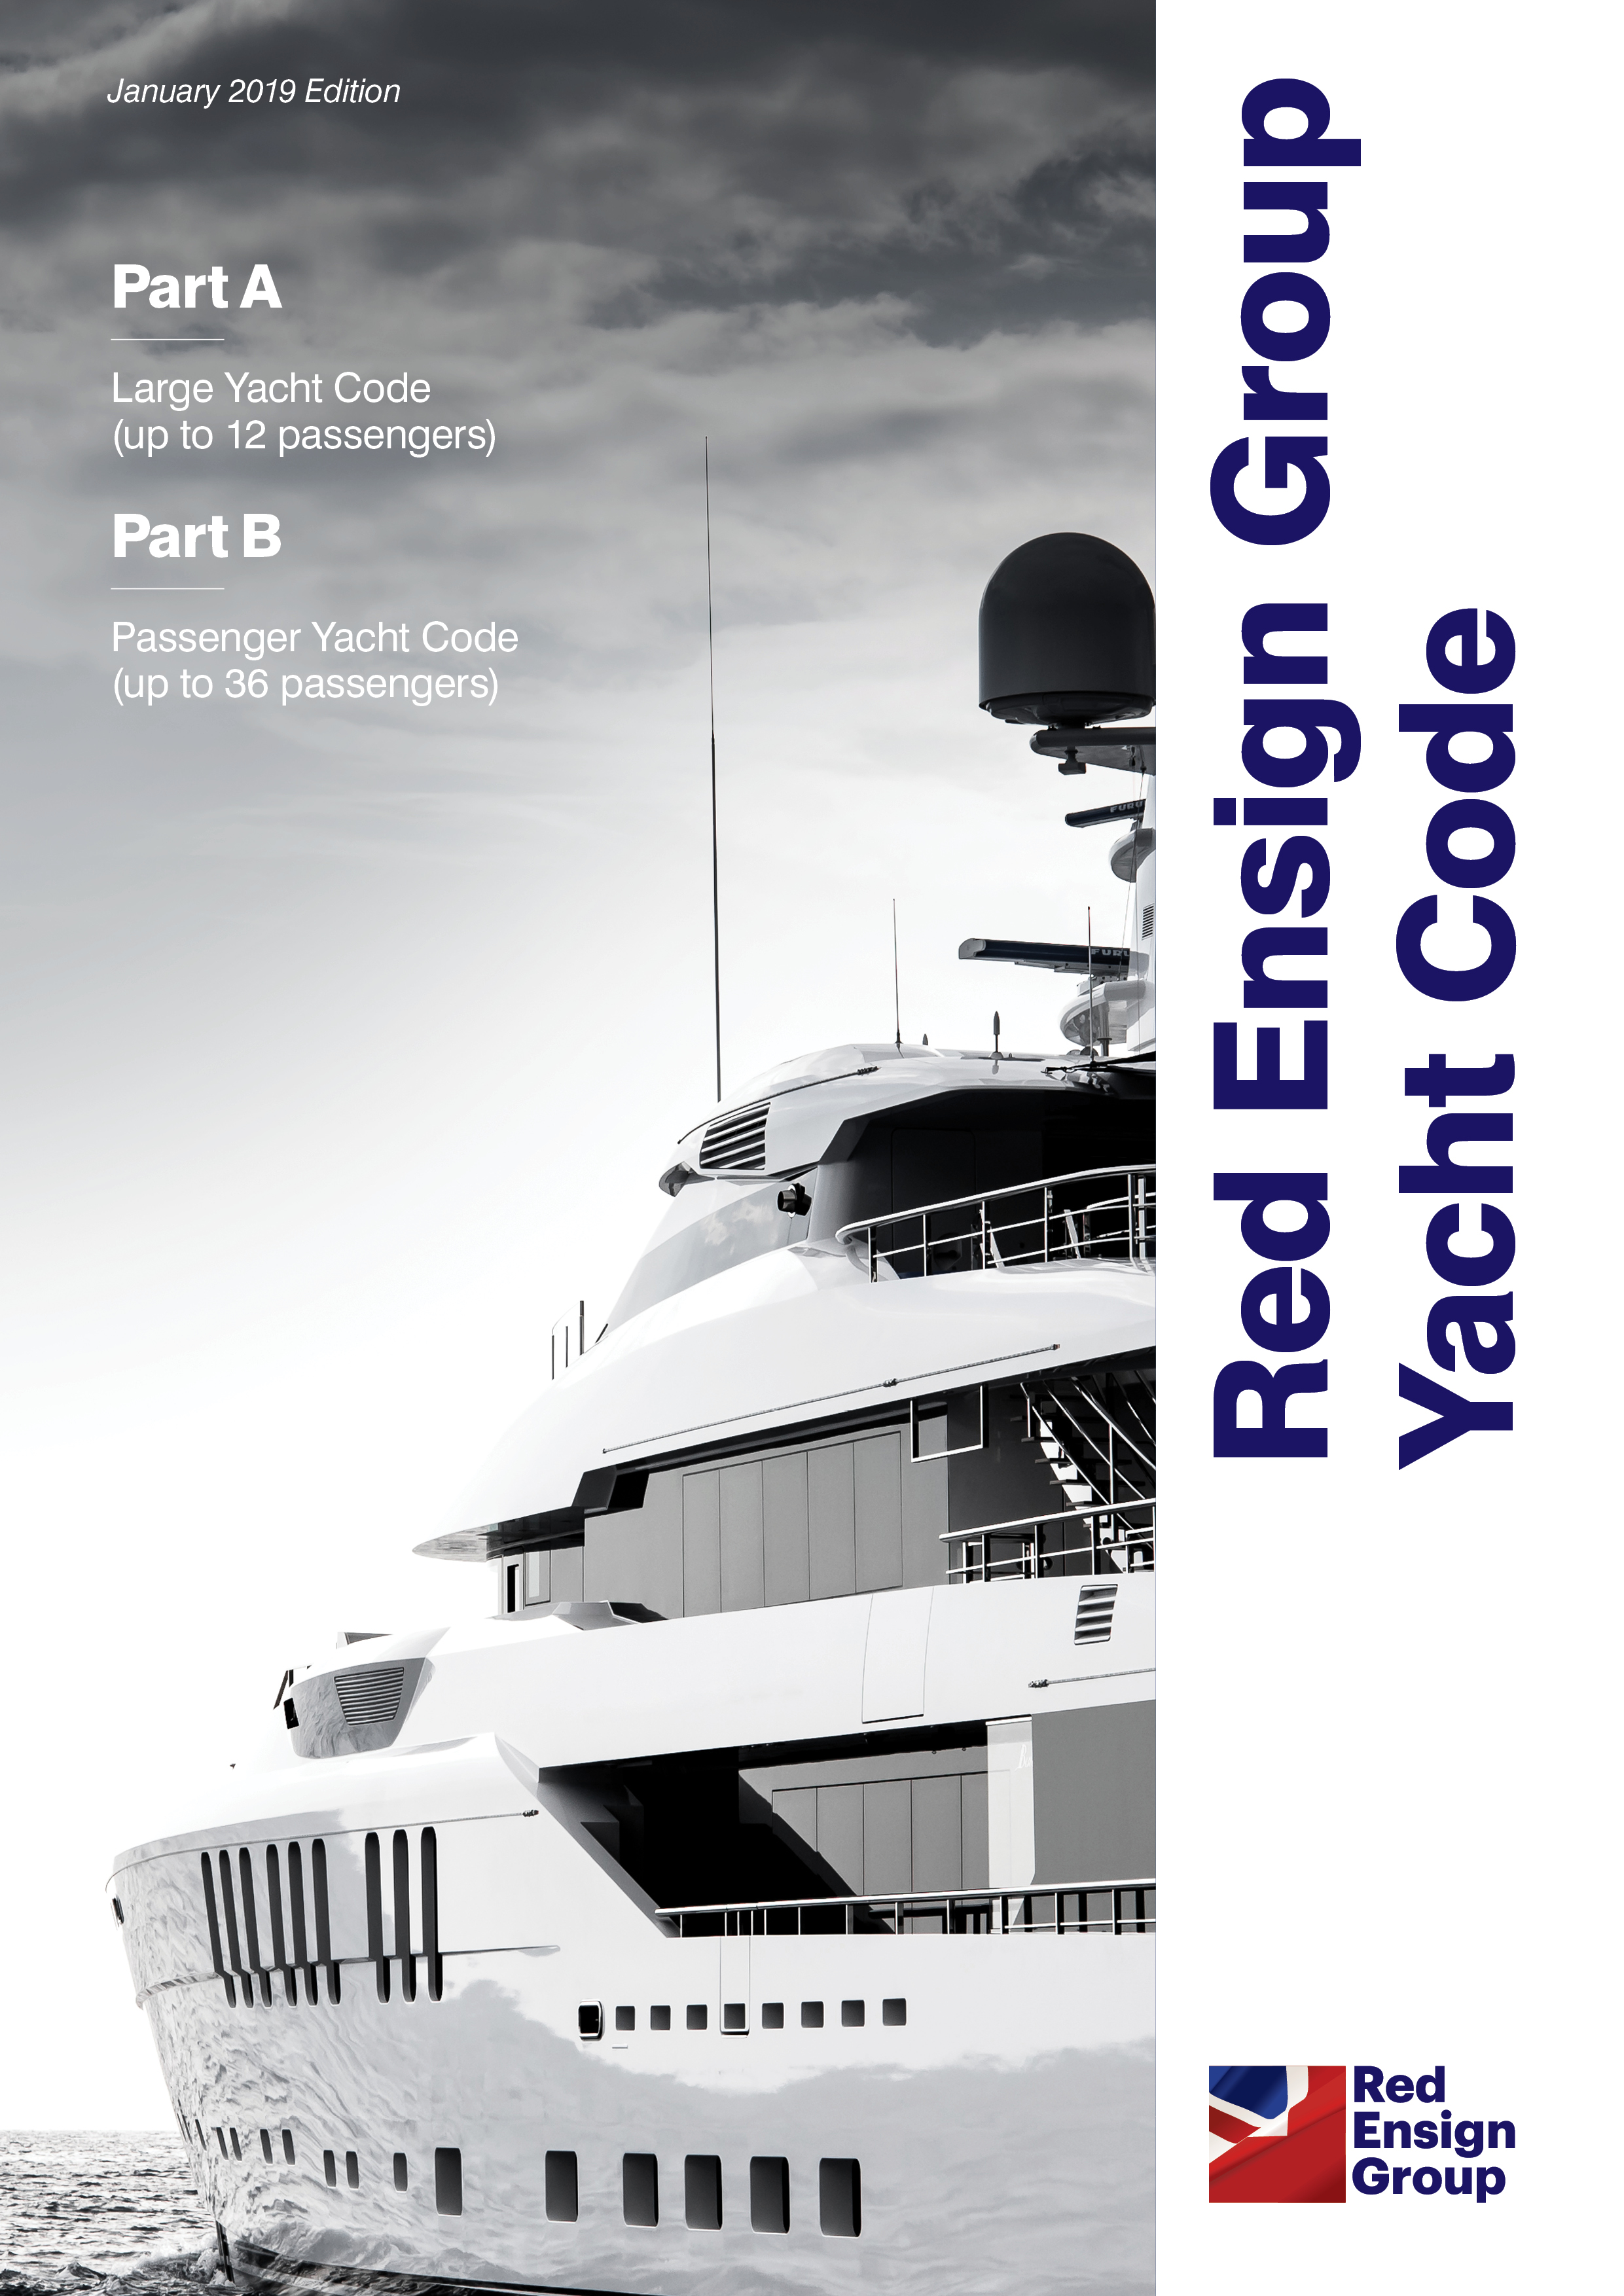 the large yacht code